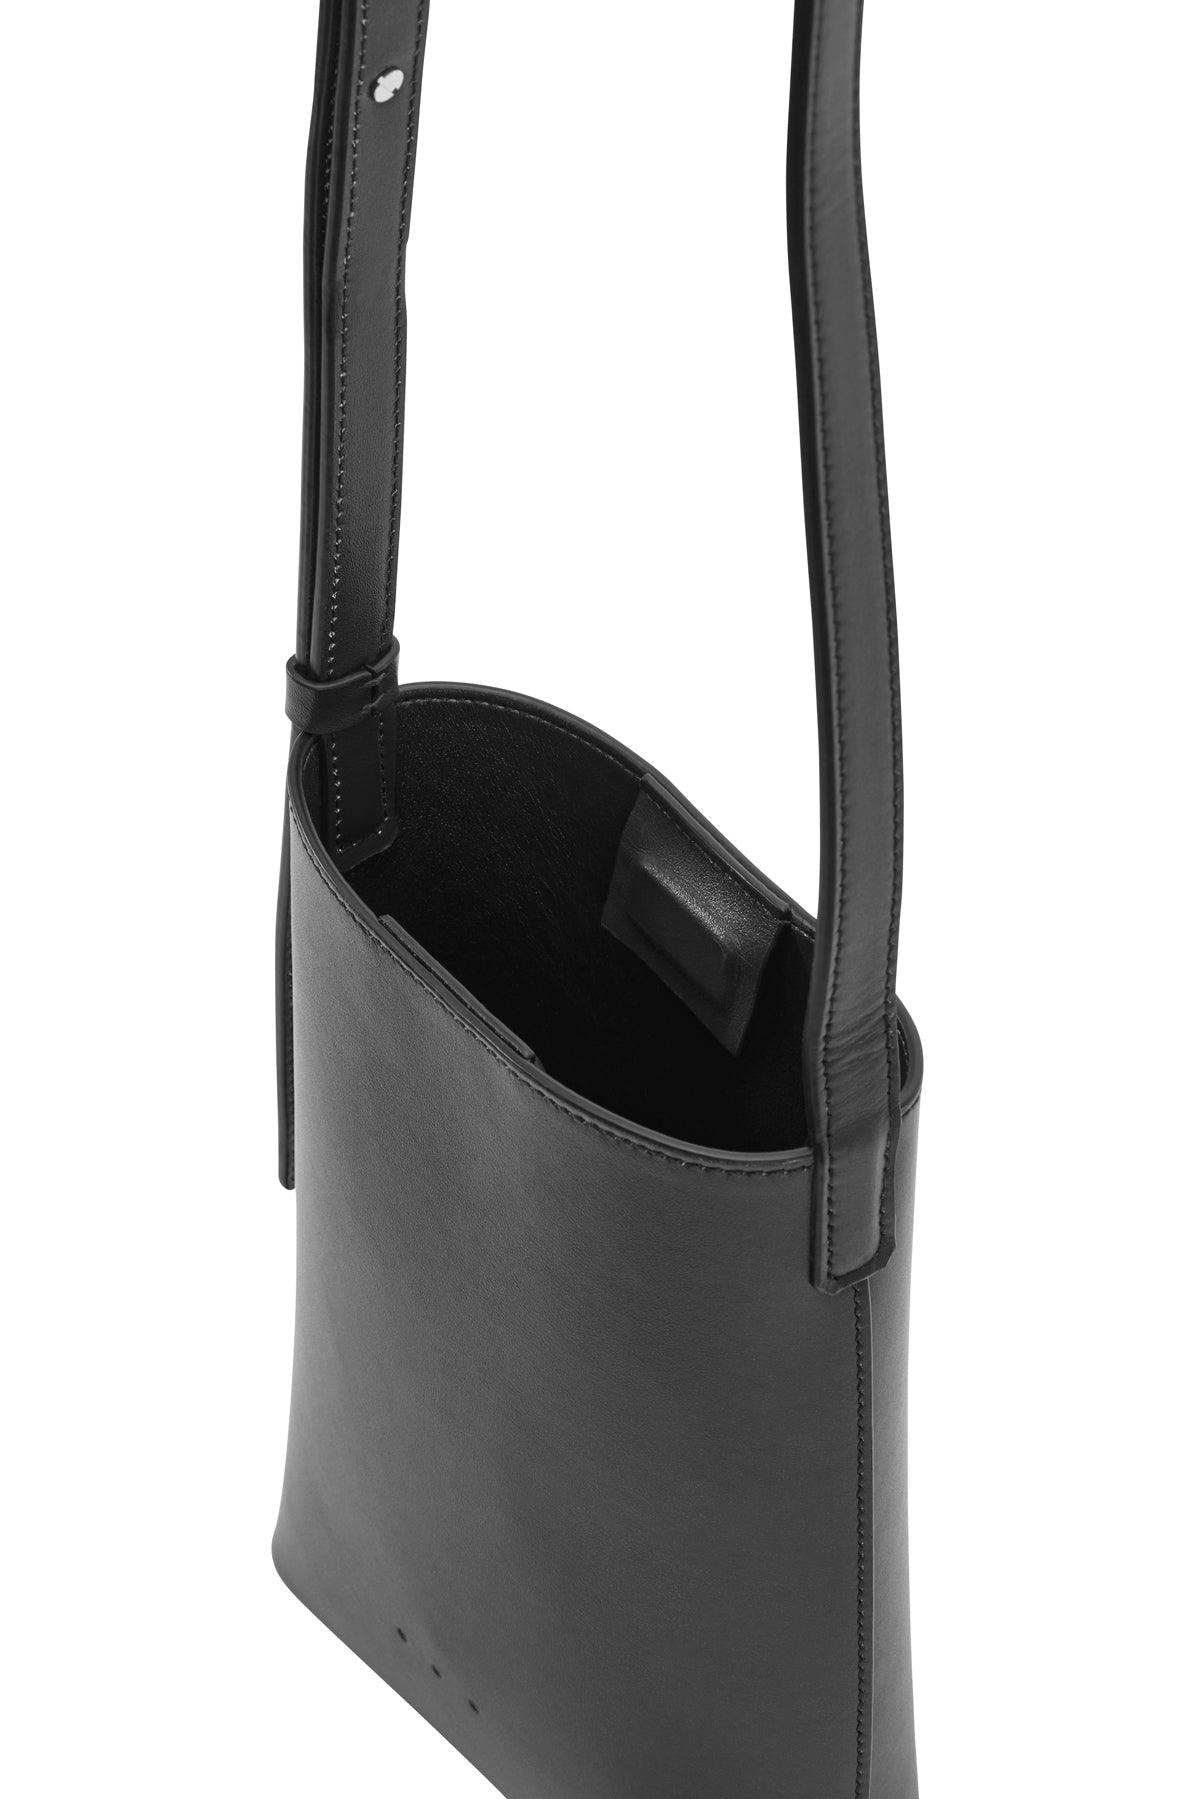 Buy AESTHER EKME Lune Shopper Tote - Black At 39% Off